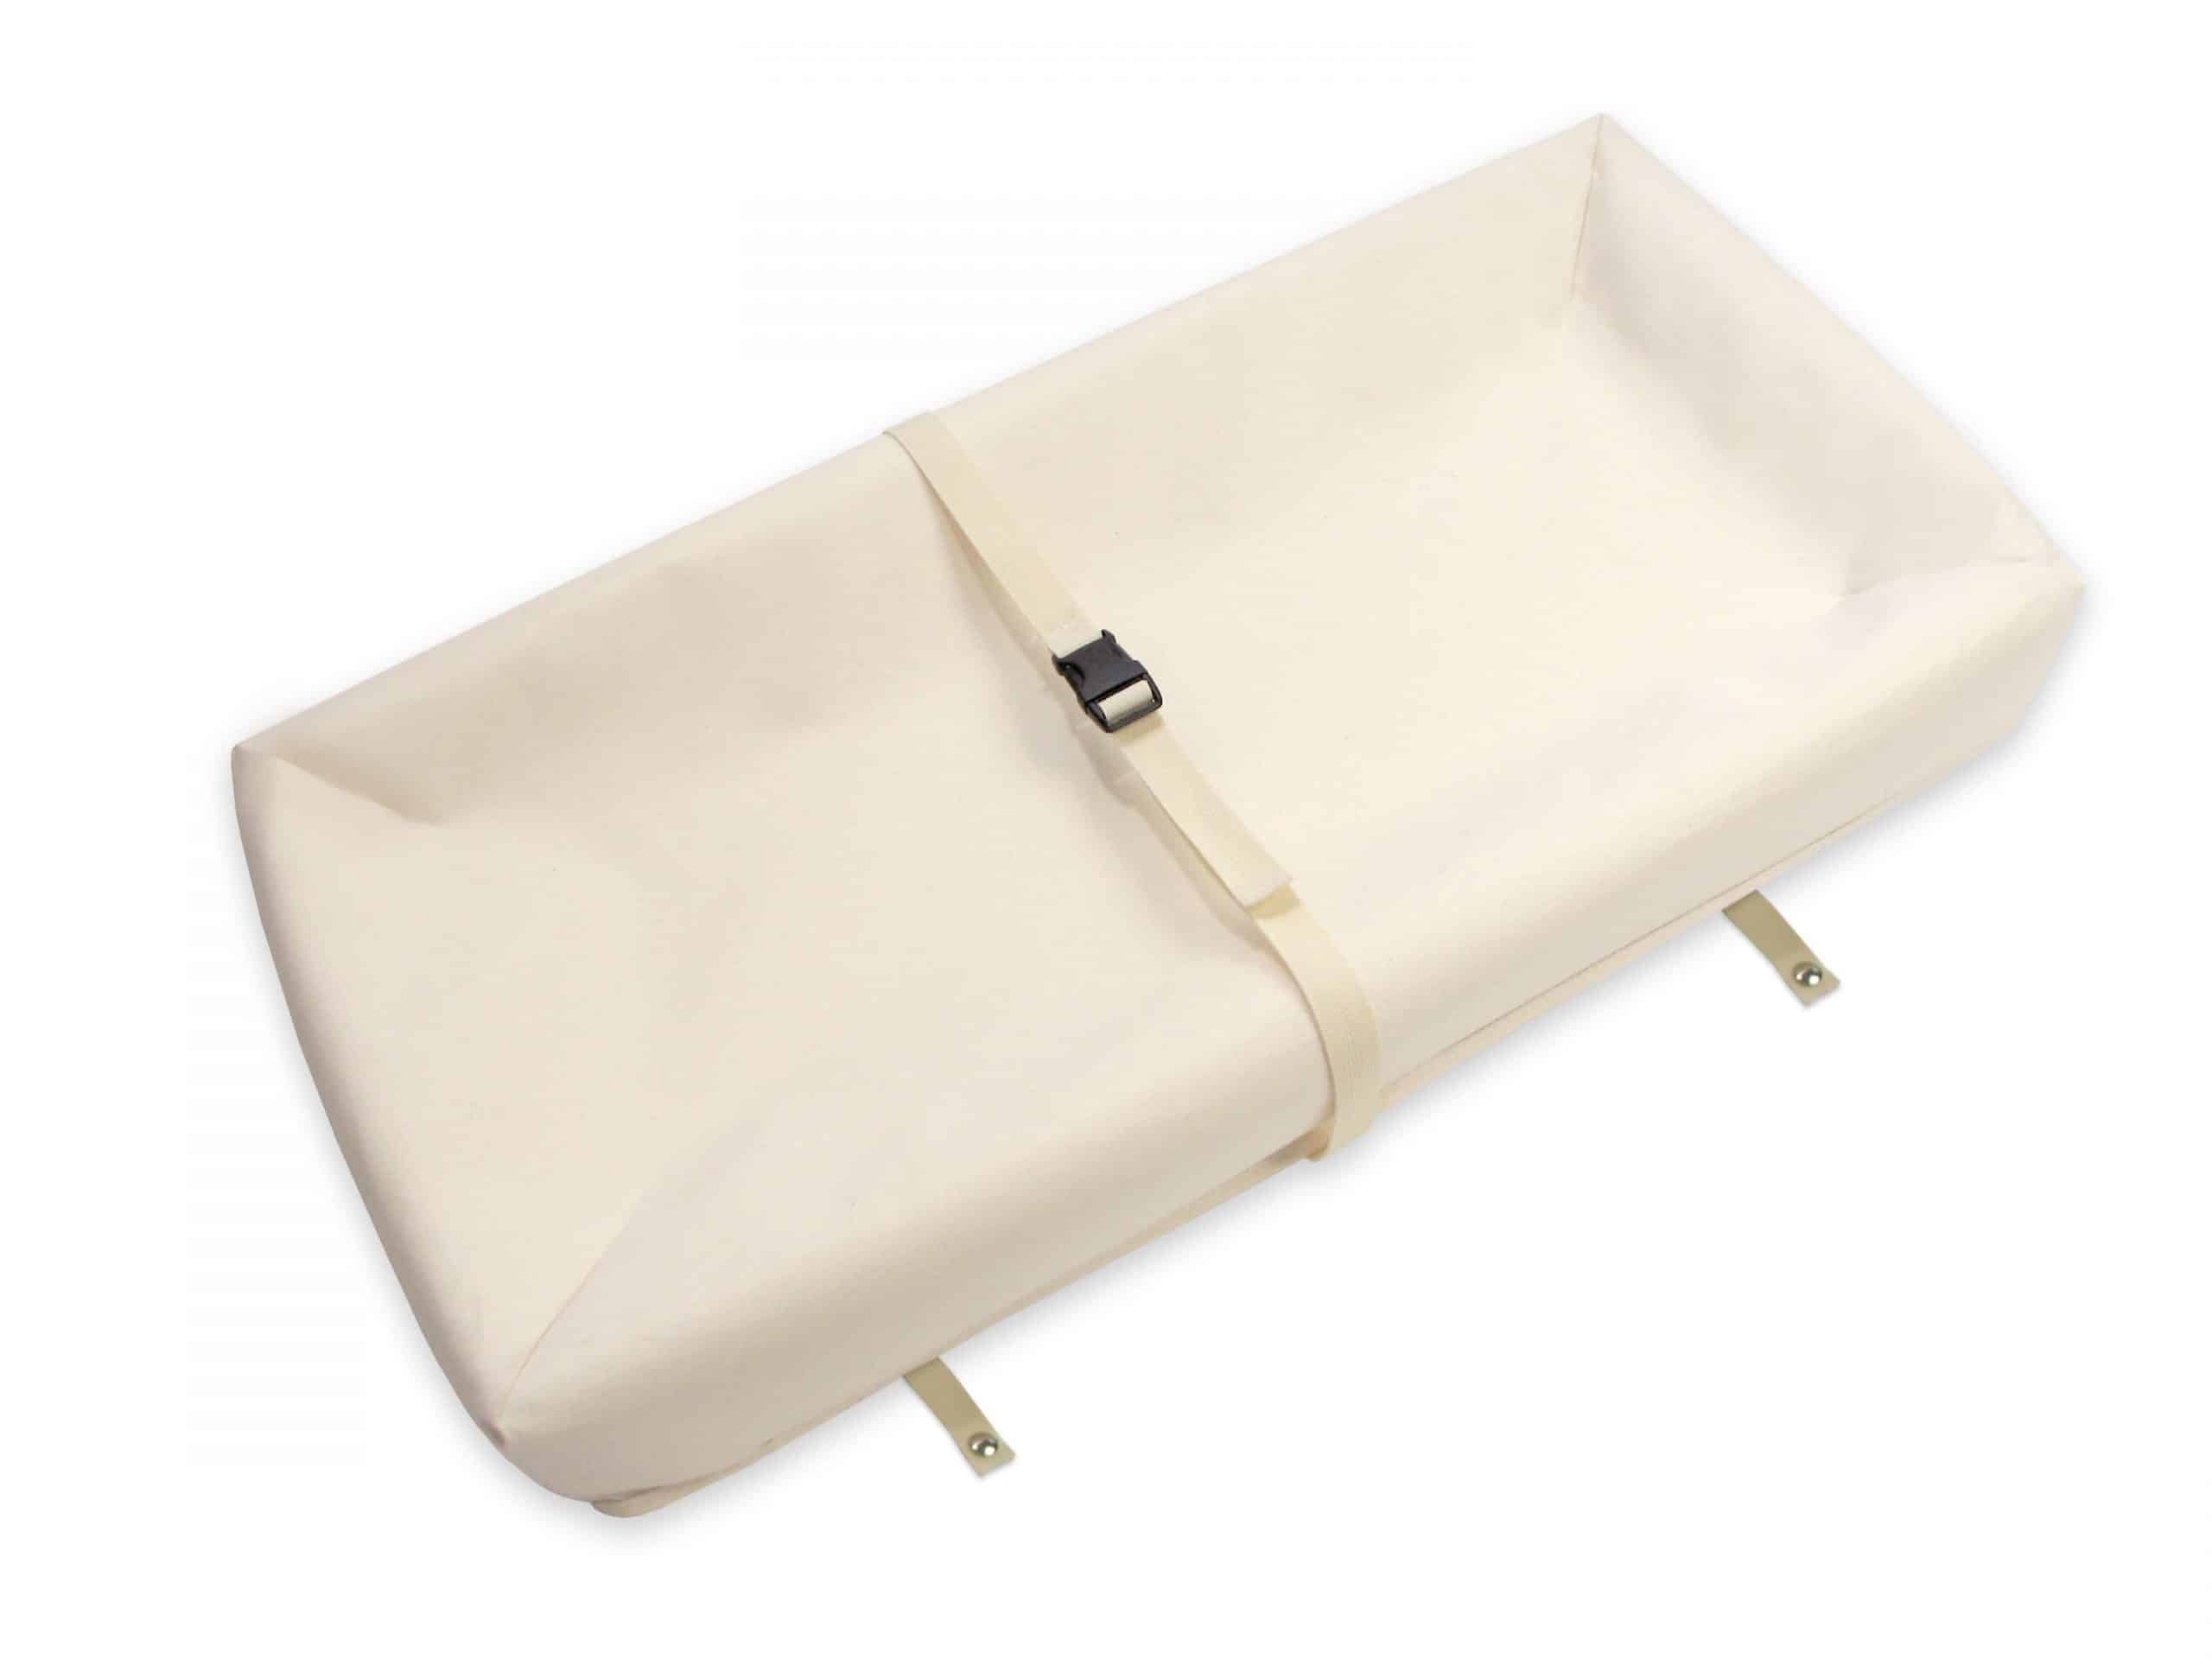 Naturepedic Changing Pad 4 sided Contoured from Gimme the Good Stuff